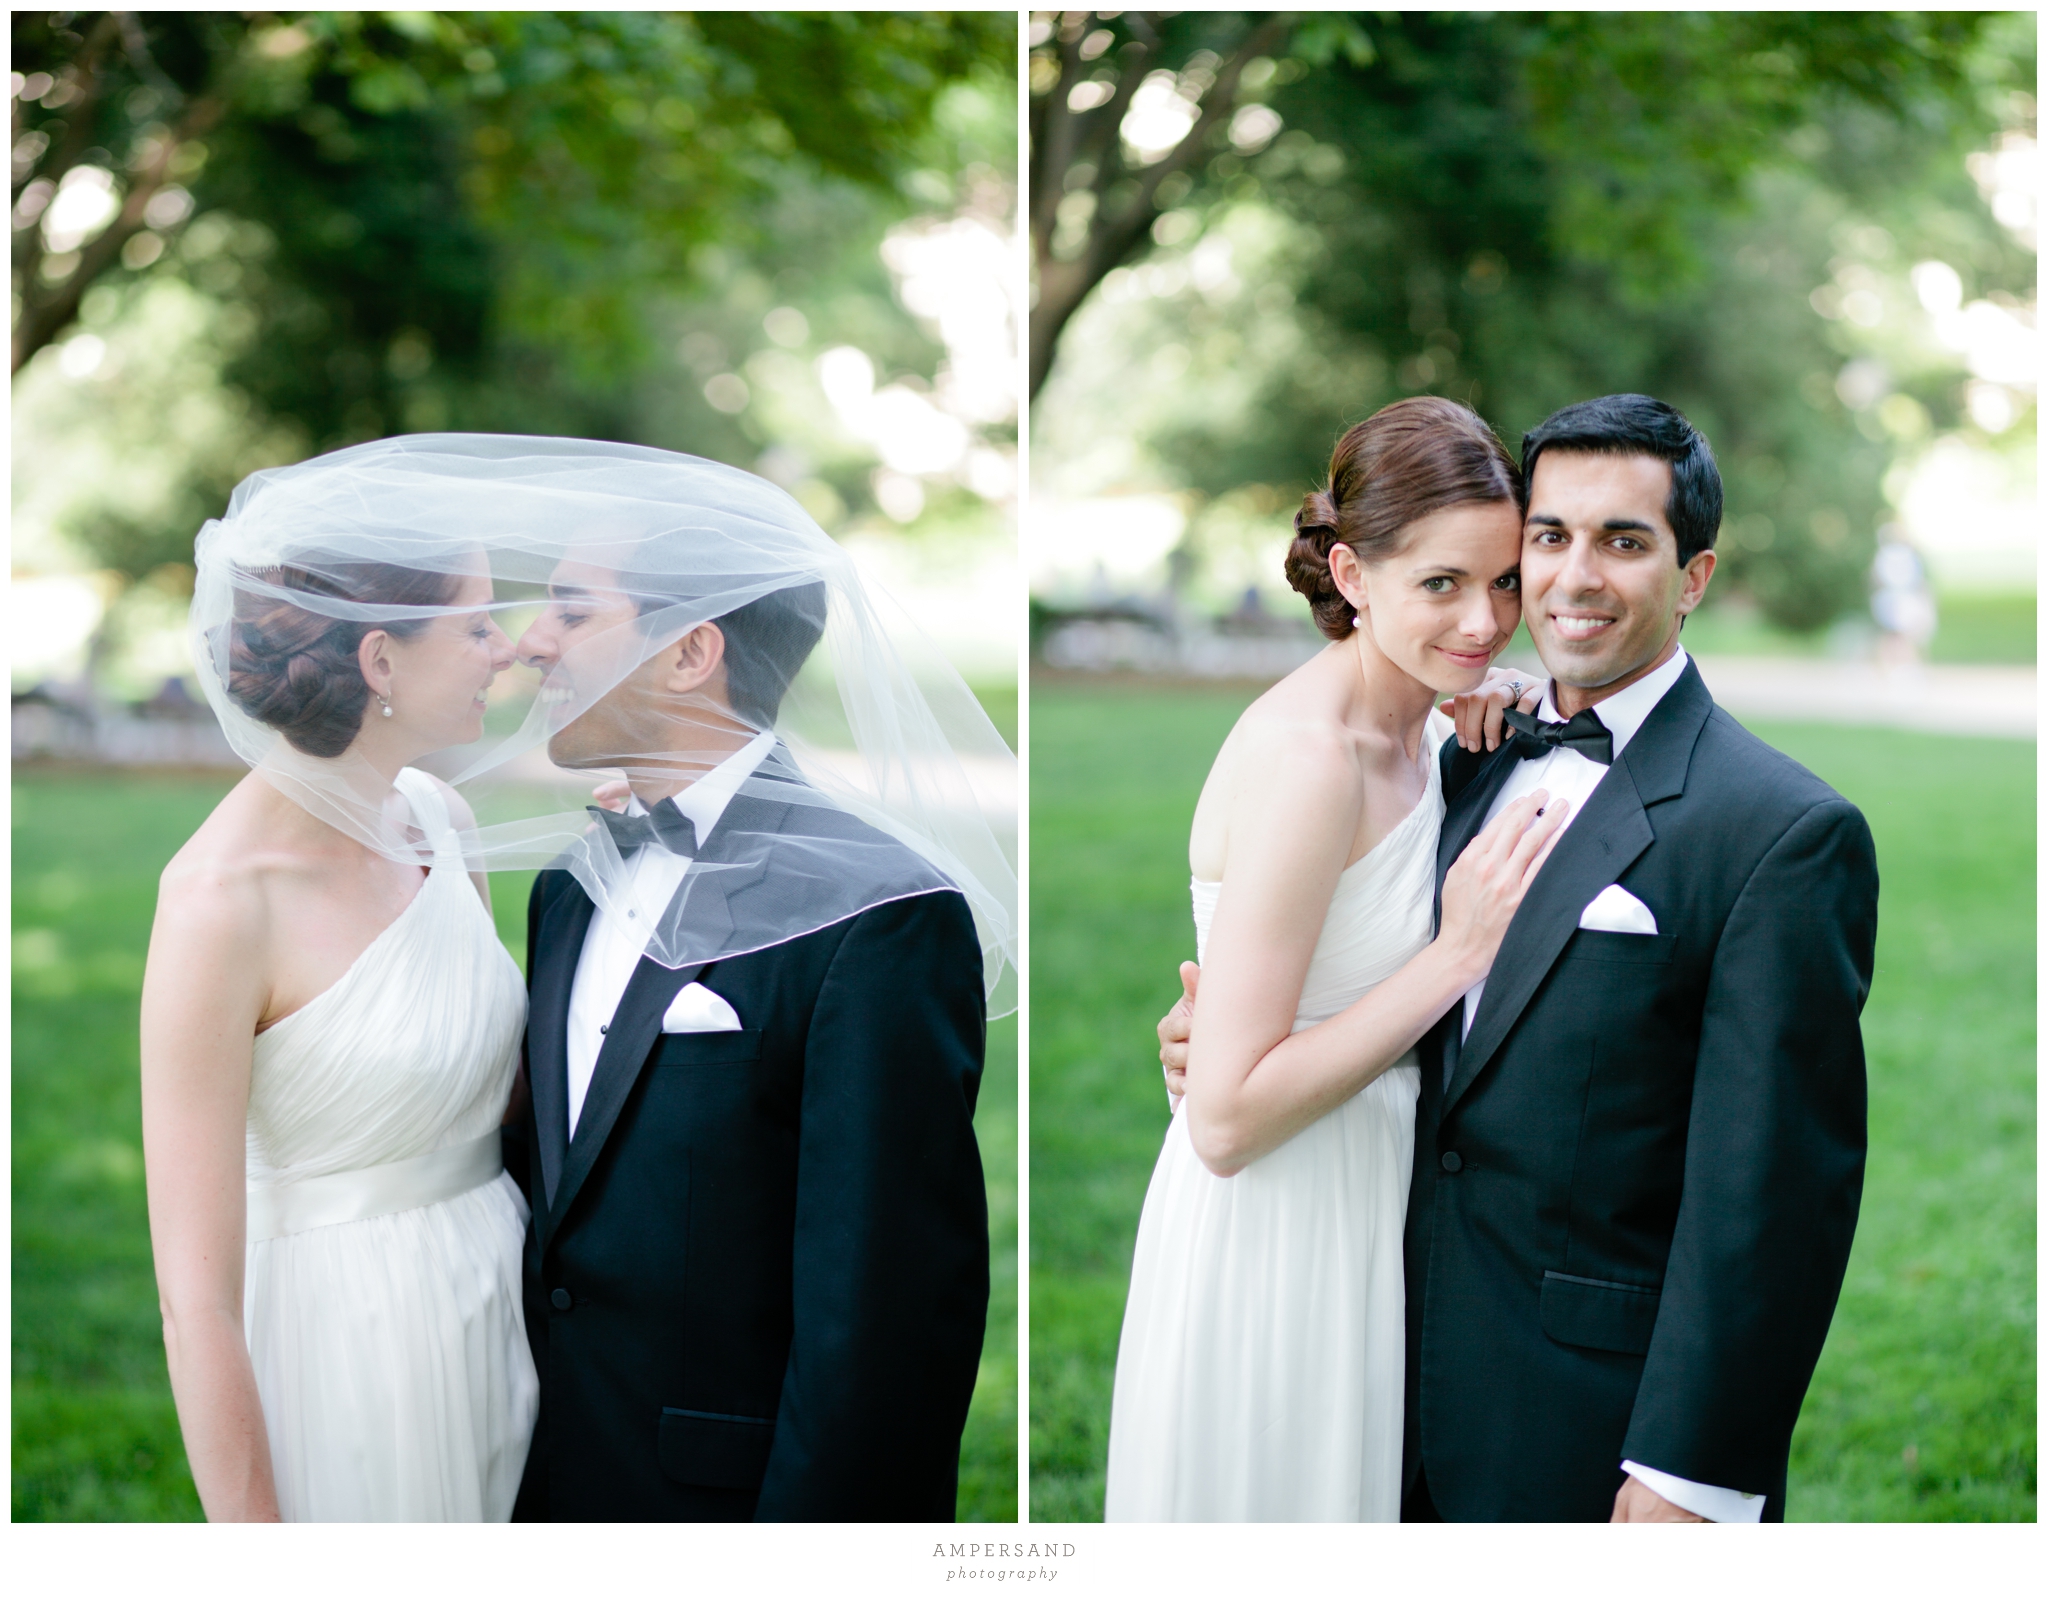 Sweet bride & groom // Photos by Ampersand Photography